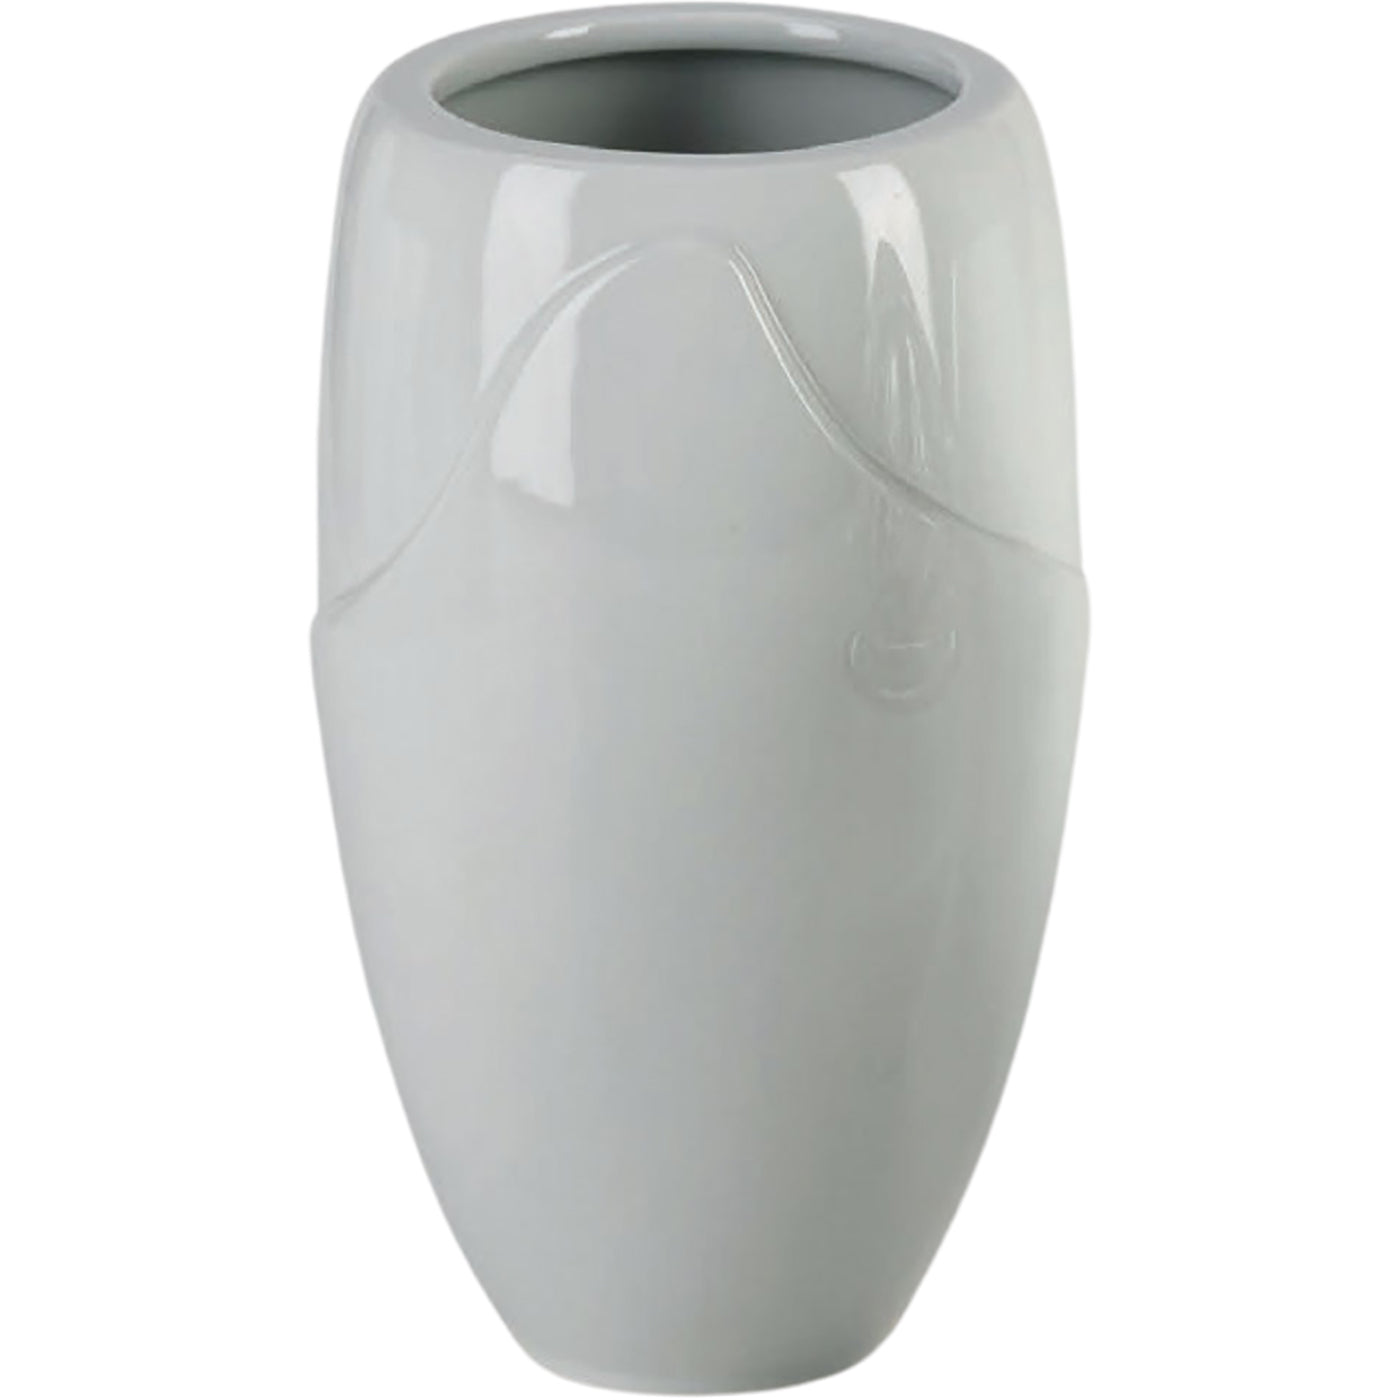 Grave vases Onda 21x13cm - 8.3x5.1in In white porcelain, ground attached ON168T